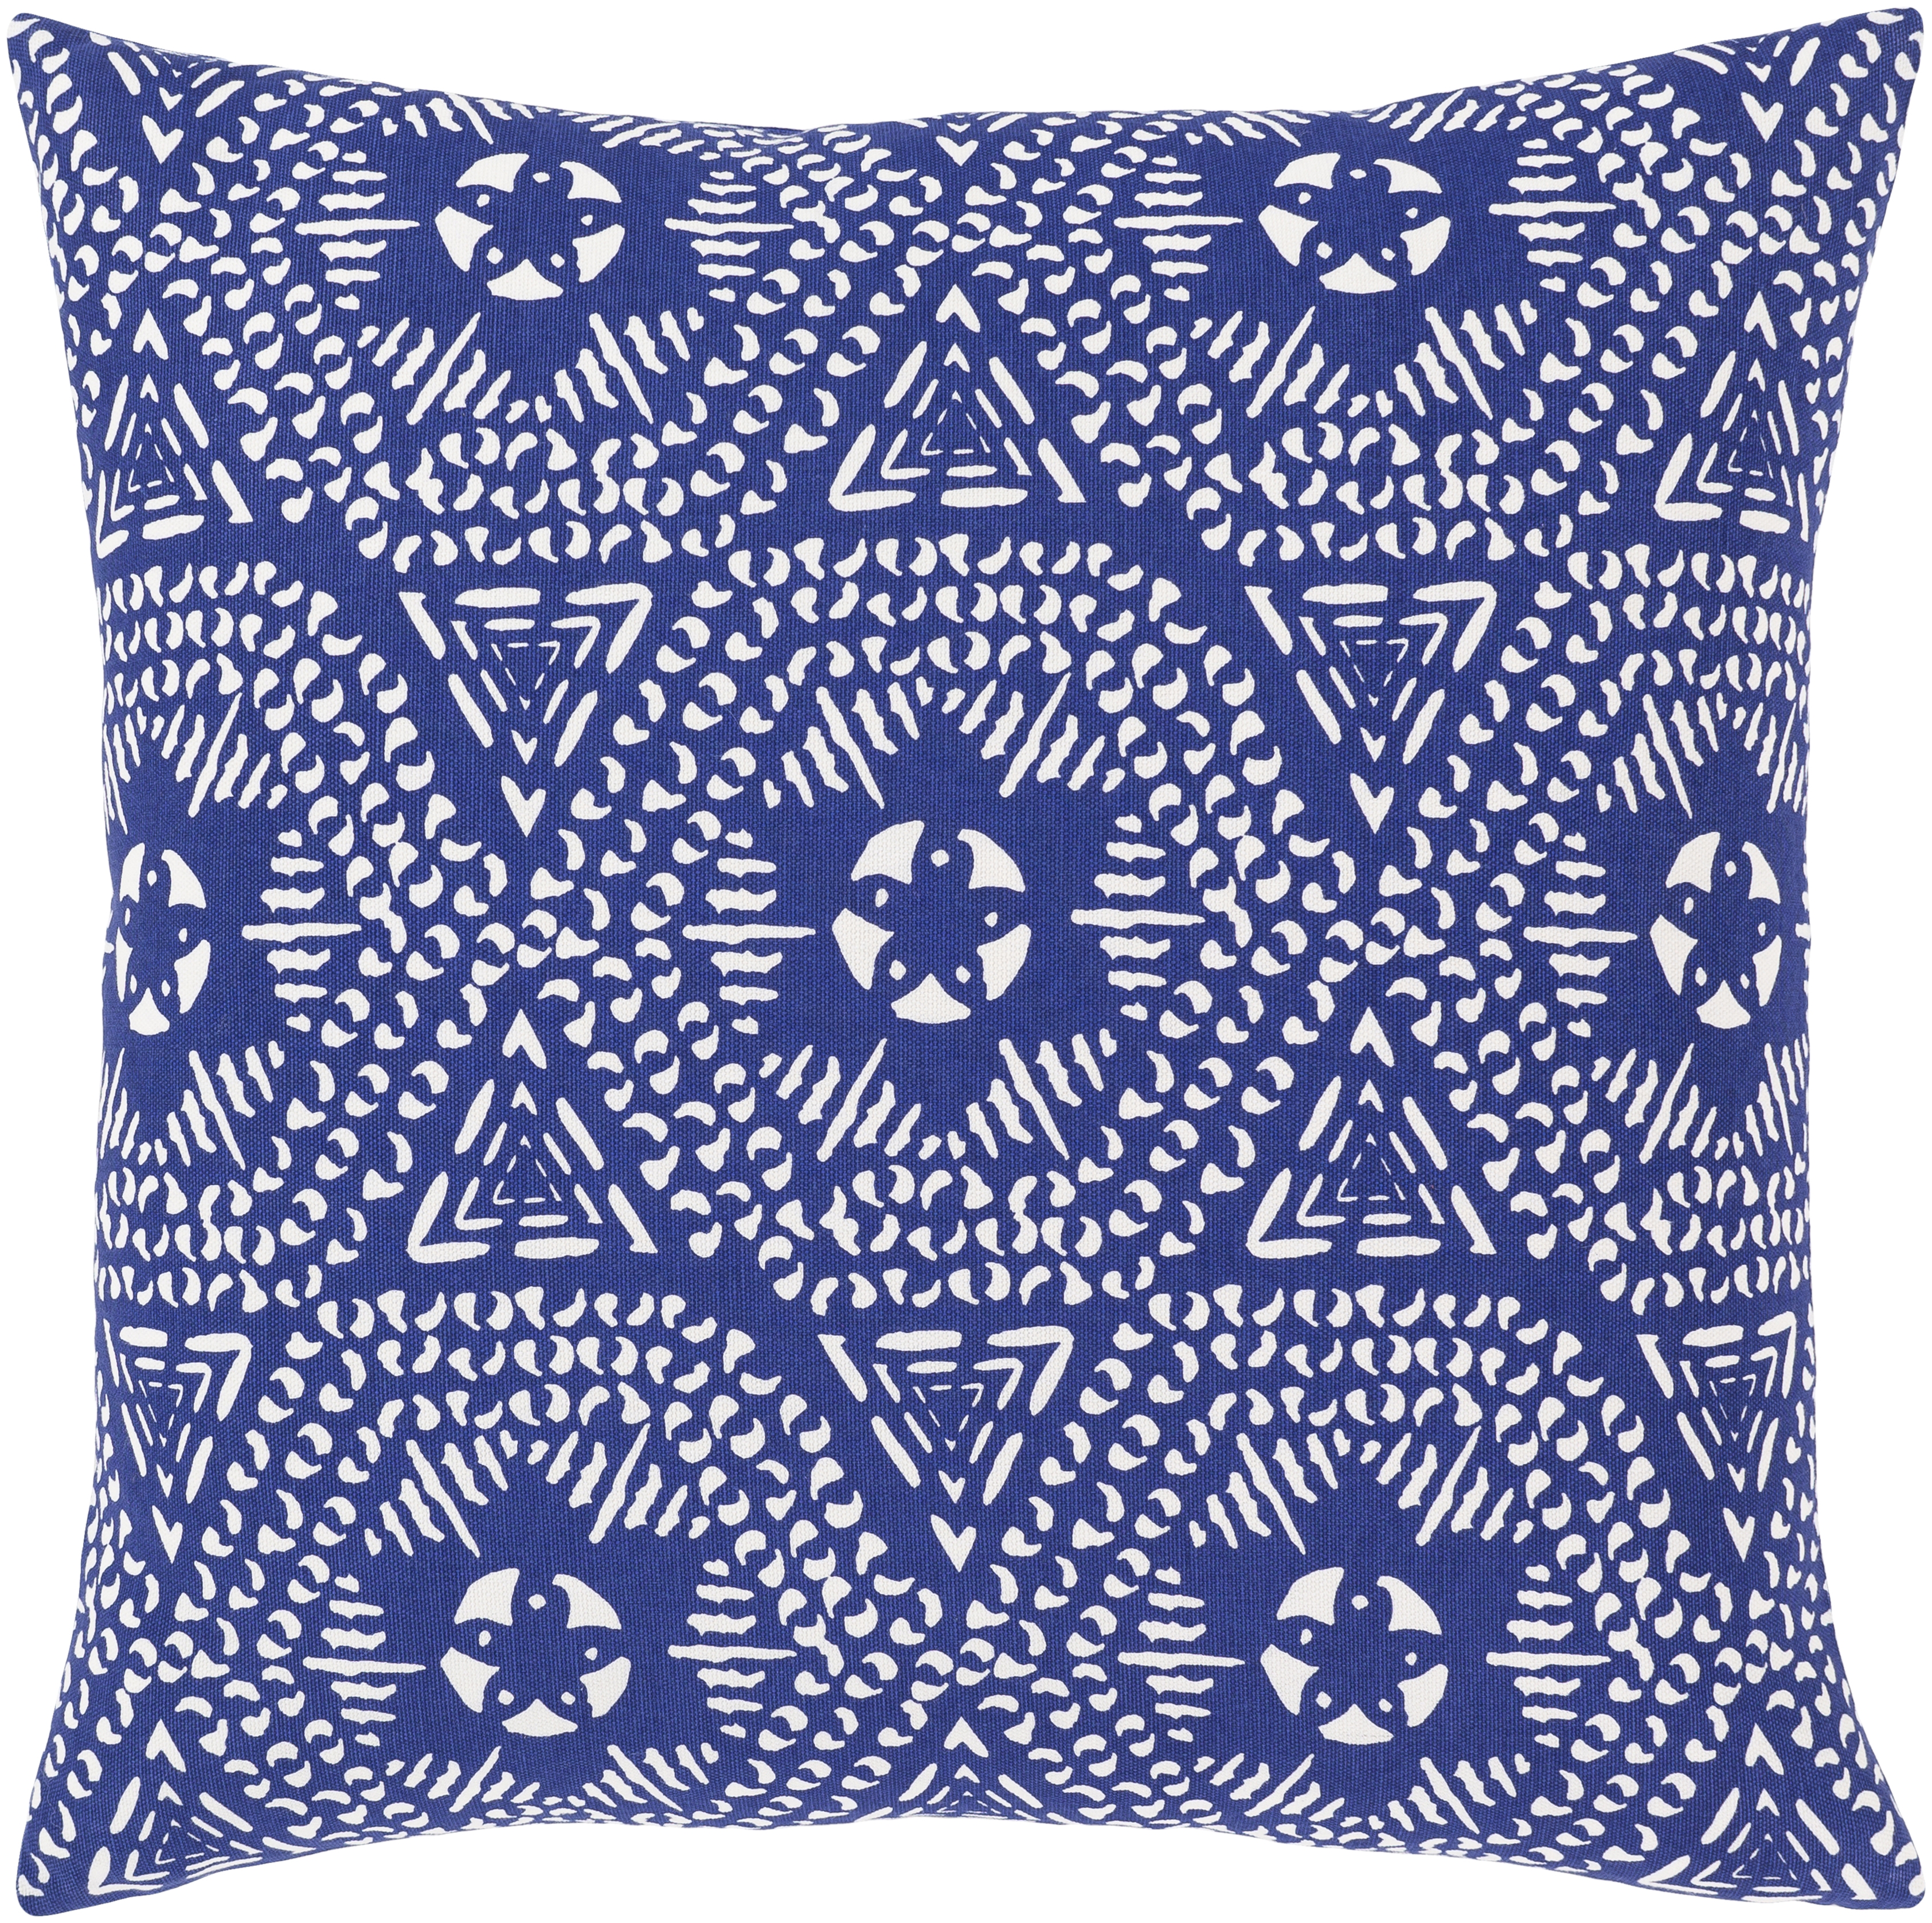 Global Blues Throw Pillow, 18" x 18", with poly insert - Image 0